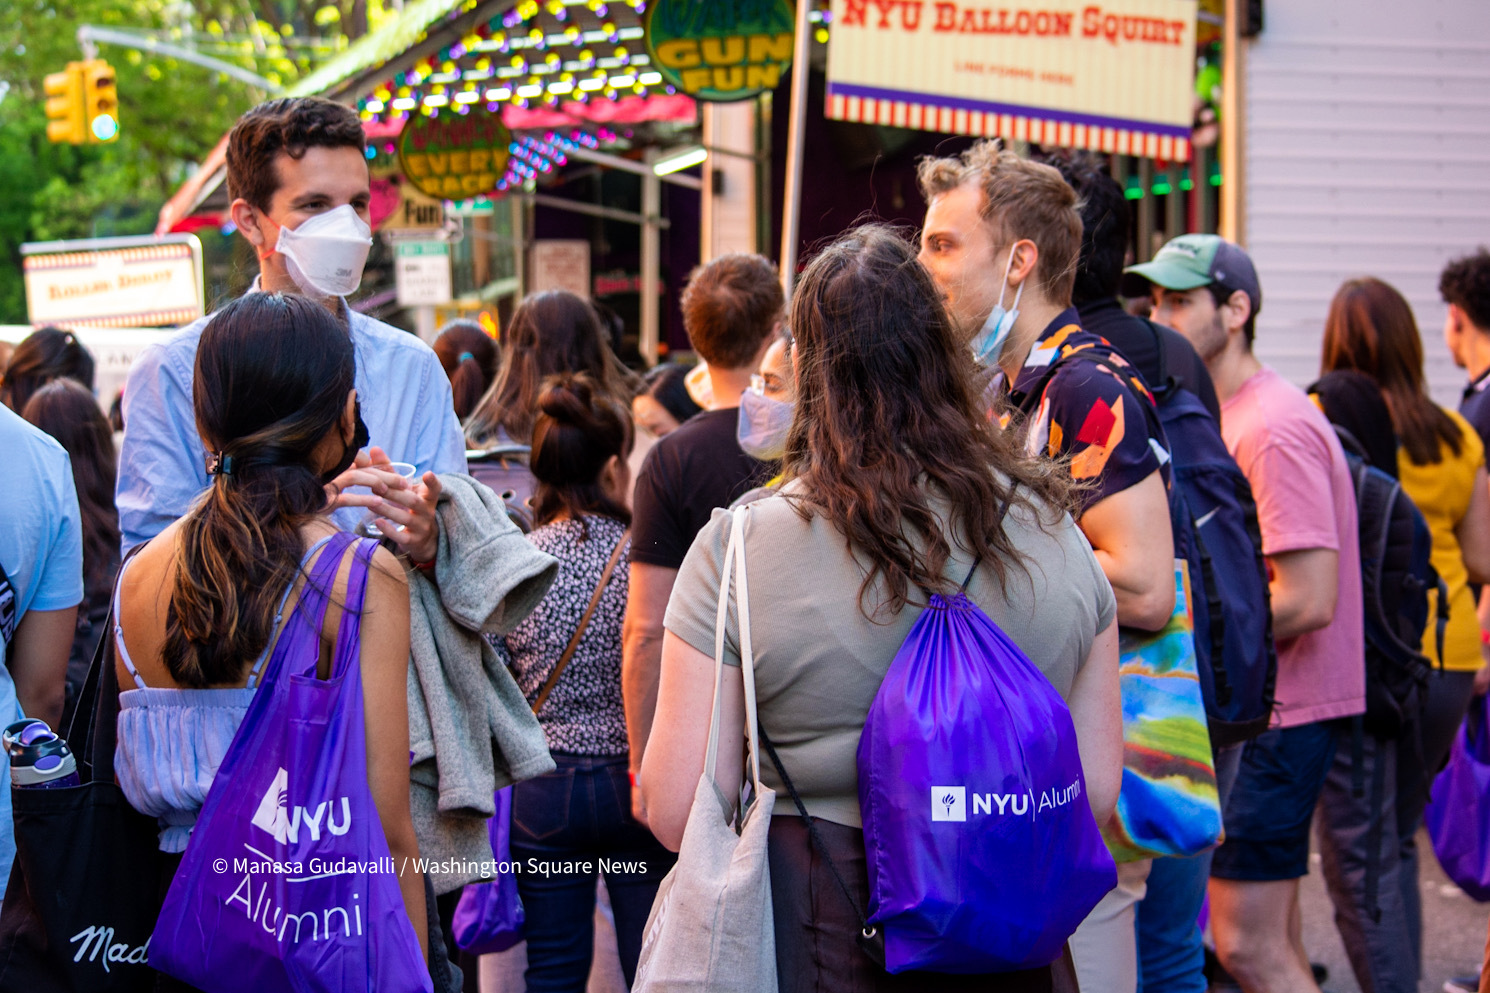 A group of graduates stand on the street with purple bags with the white text reading “NYU Alumni Bags.” Behind them are crowds of people and carnival tents.